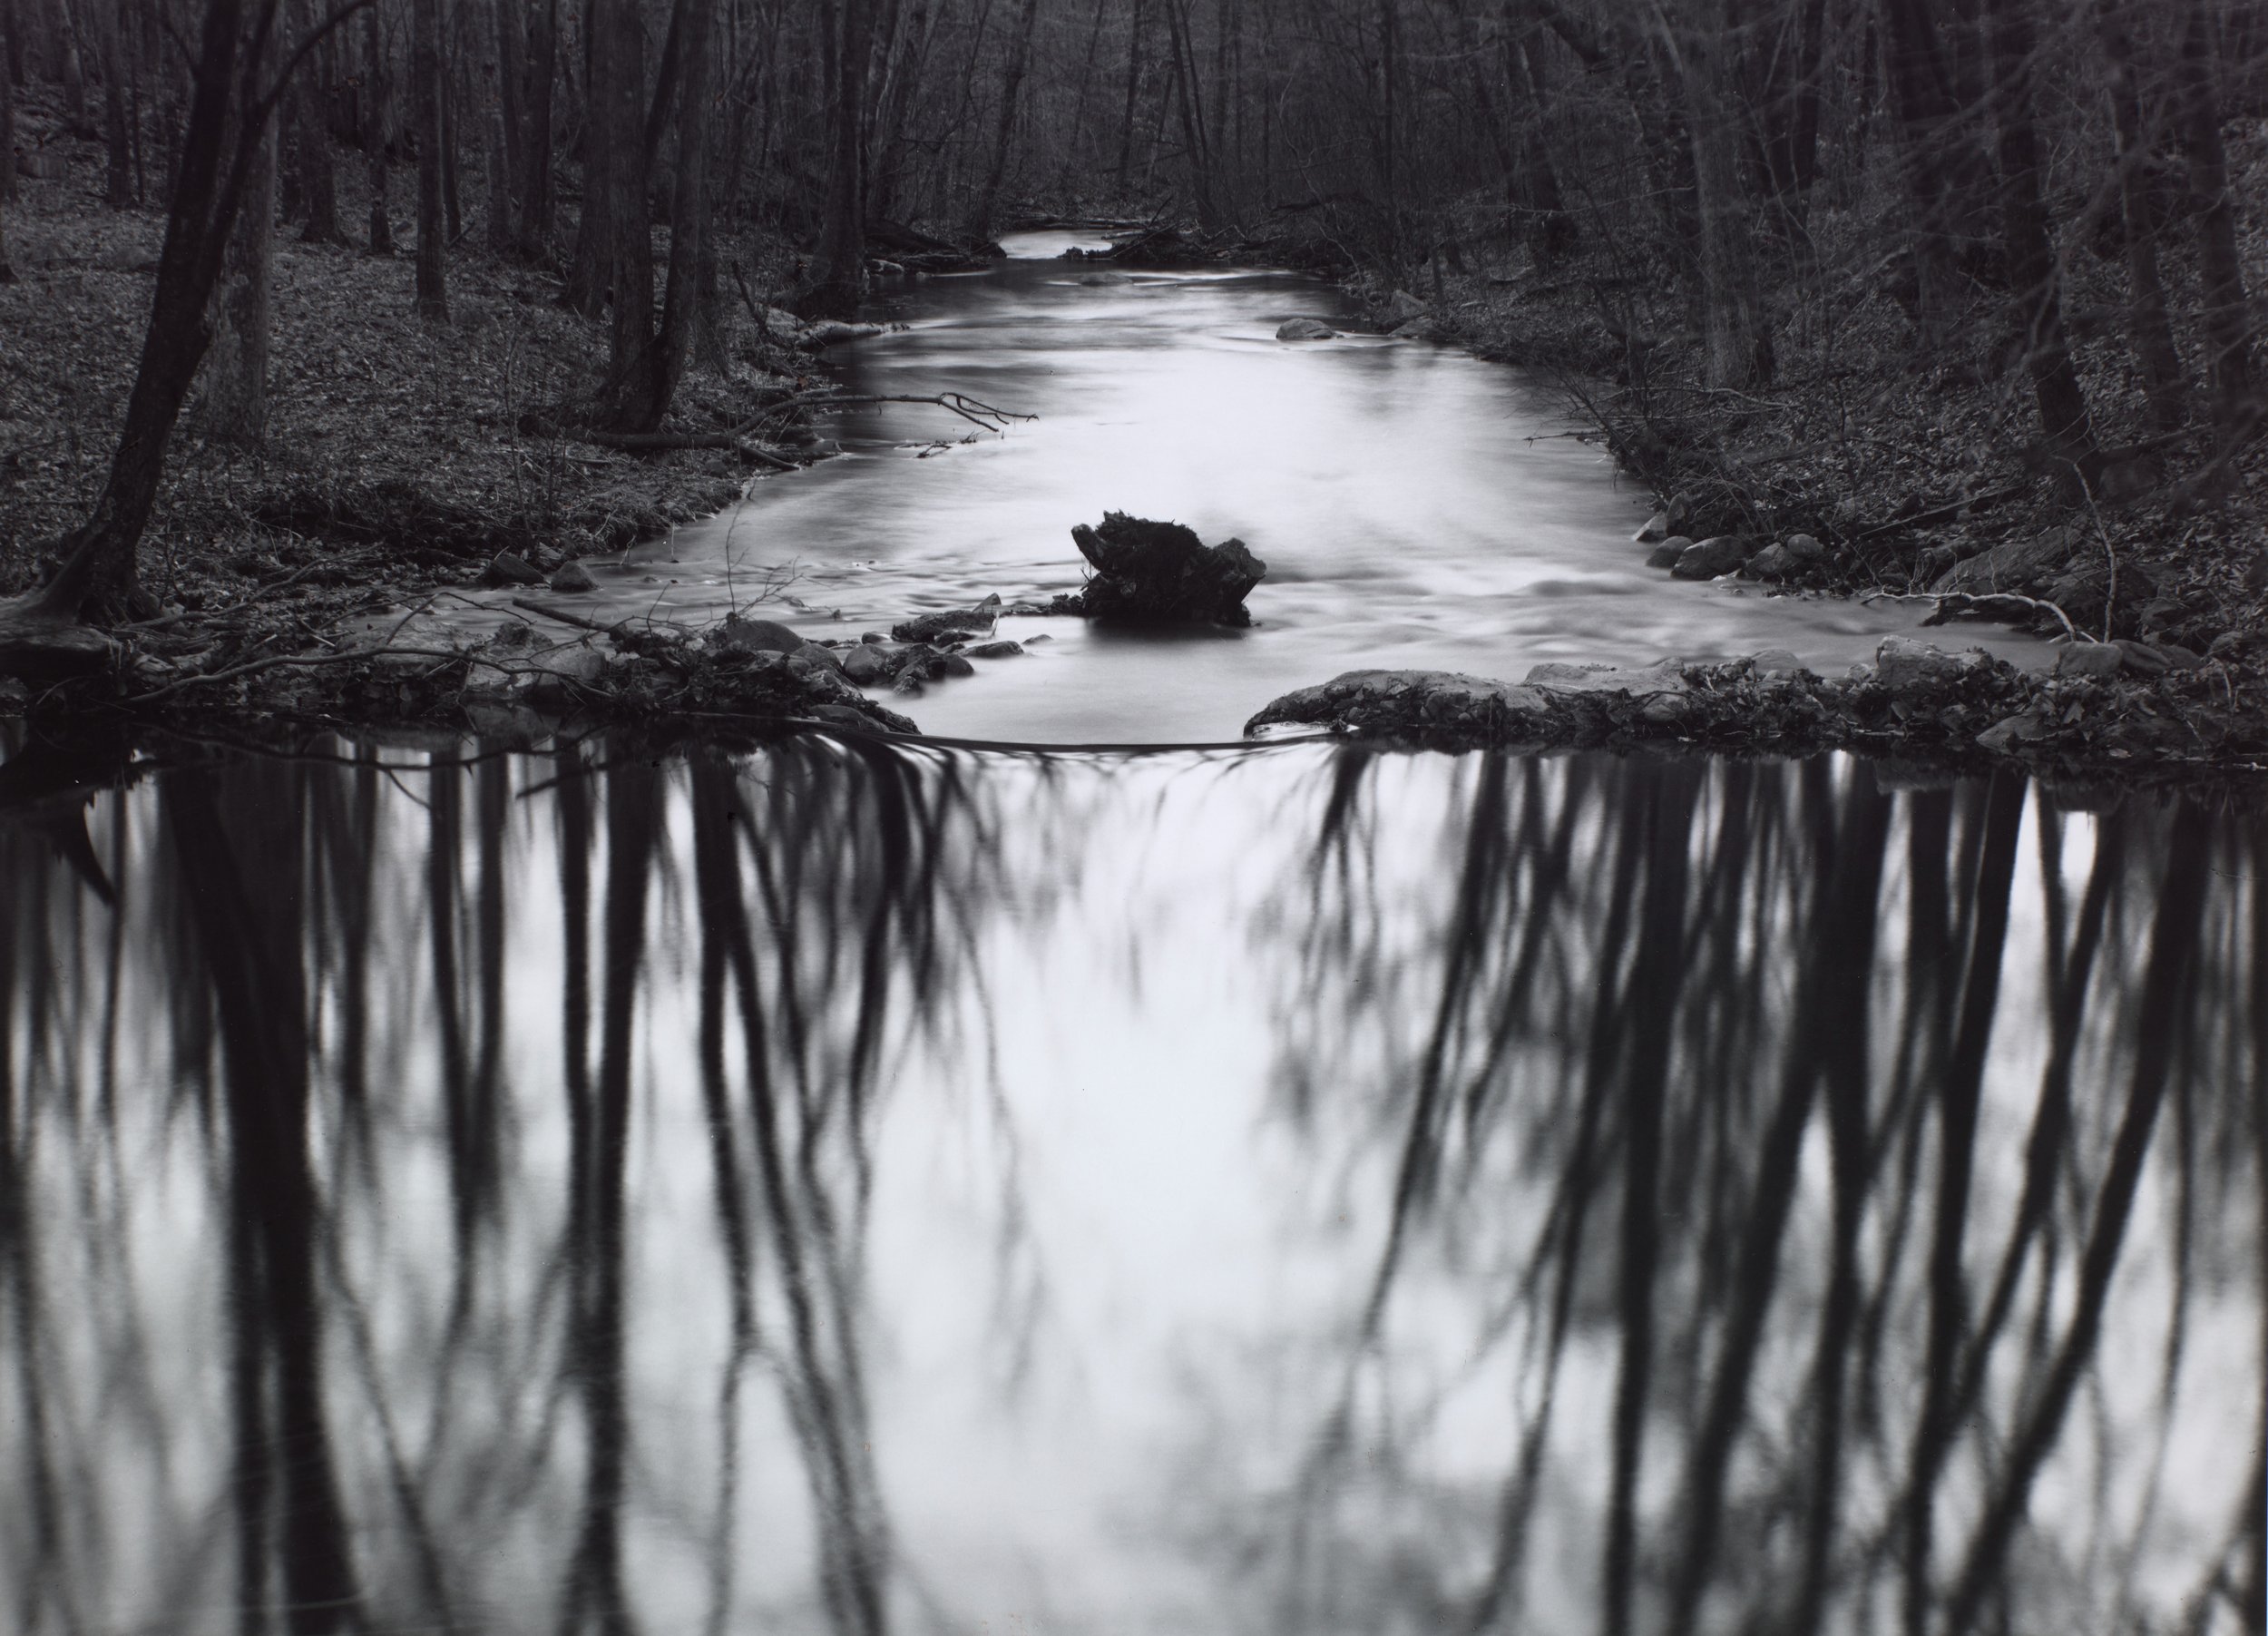  Paul Caponigro (United States, born 1932),  Reflecting Stream, Redding, Connecticut , 1968, gelatin silver print mounted on board, 9 7/8 x 13 1/2 inches. Portland Museum of Art, Maine. Promised Gift from the Judy Glickman Lauder Collection, 7.1998.1